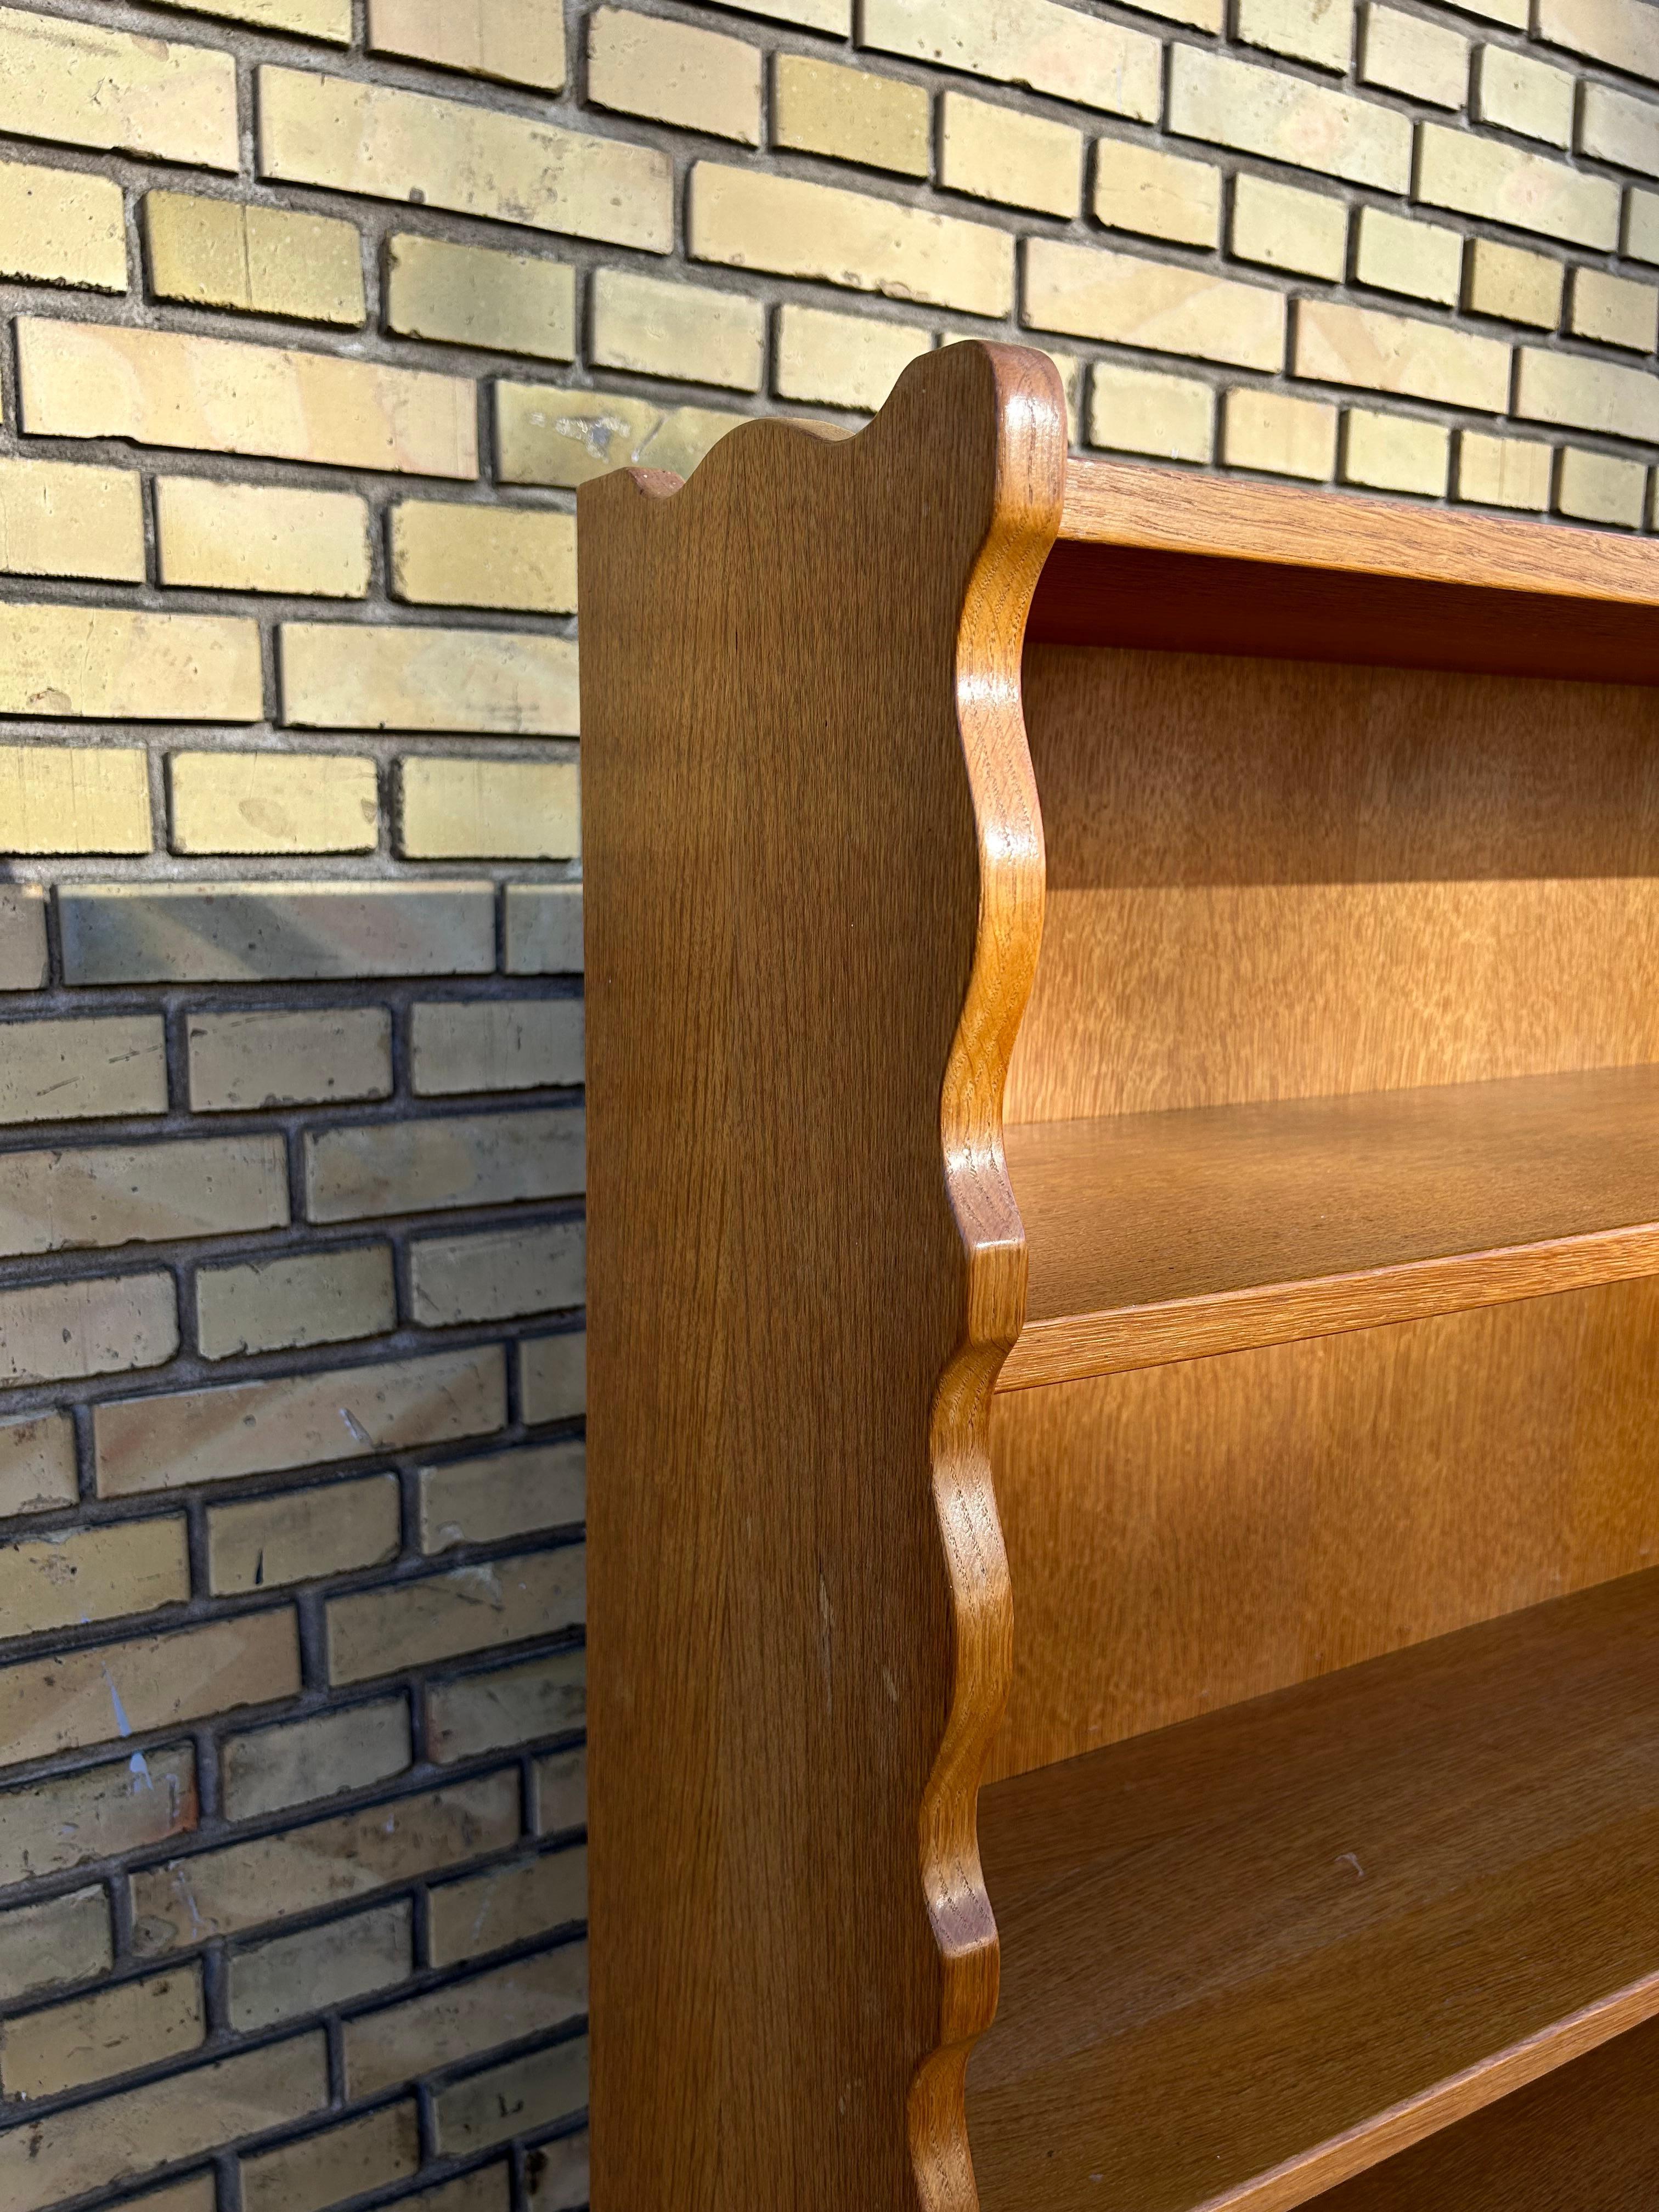 Sculptural solid oak book shelf by Danish designer Henry / Henning Kjærnulf manufactured by Nyrup Møbelfabrik in Denmark in the 1960’s.
Henry / Henning Kjærnulf was a Danish designer who worked in a lot of different styles of furniture from a more